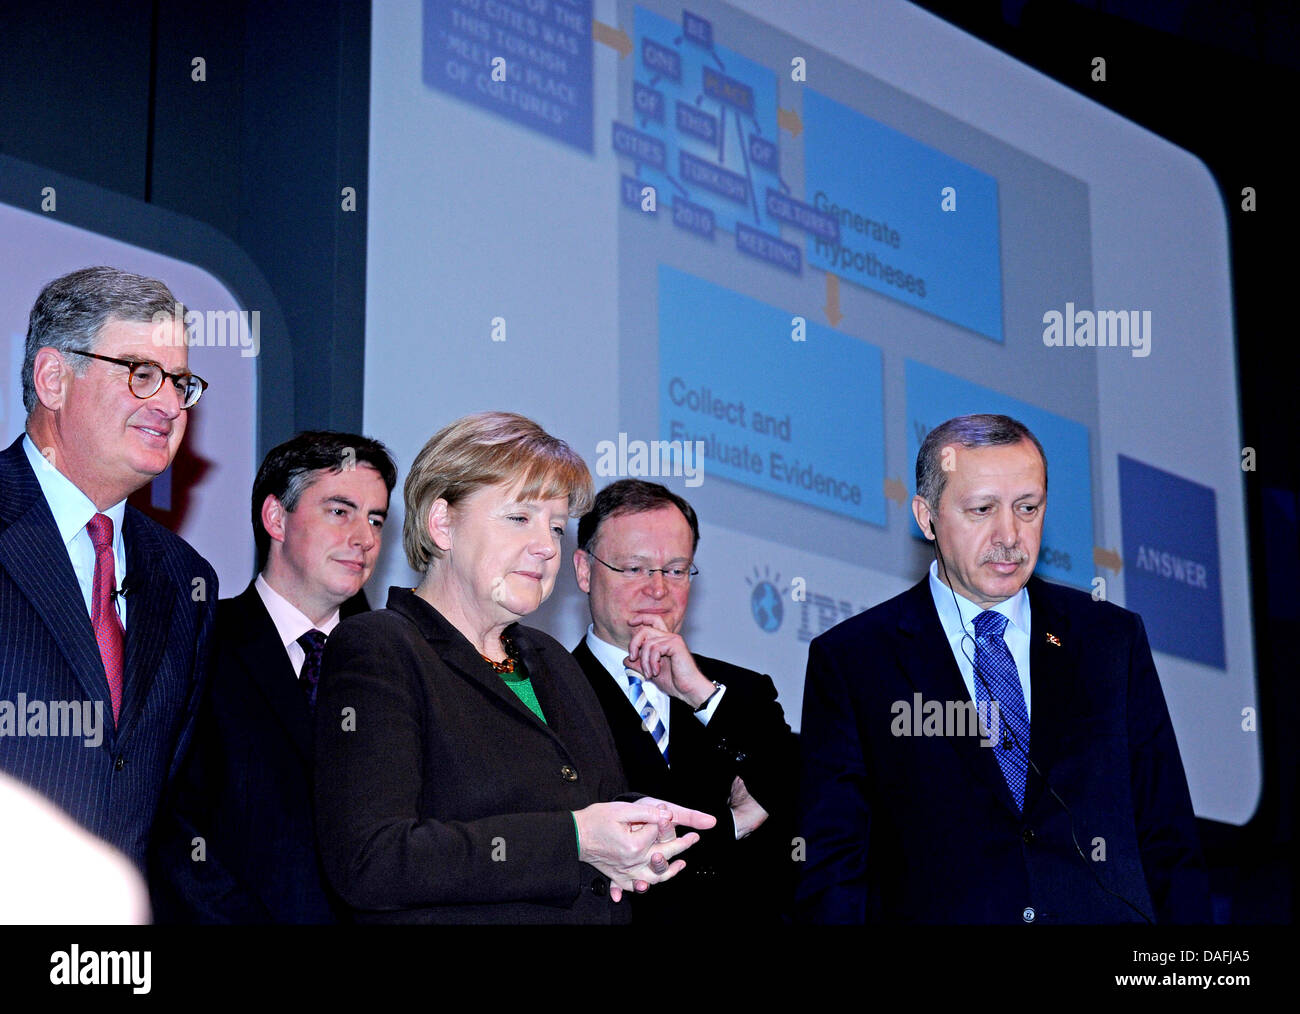 German Chancellor Angela Merkel (3-l), the head of IBM Sam Palmisano (l-r), Lower Saxony's Prime Minister David Mc Allister, the first mayor of Hanover Stephan Weil and Turkish Prime Minister Recep Tayyip Erdogan attend the inauguration of the Cebit Computer Expo in front of the supercomputer Watson in Hanover, Germany, 28 February 2011. Cebit will present over 4200 companies from  Stock Photo